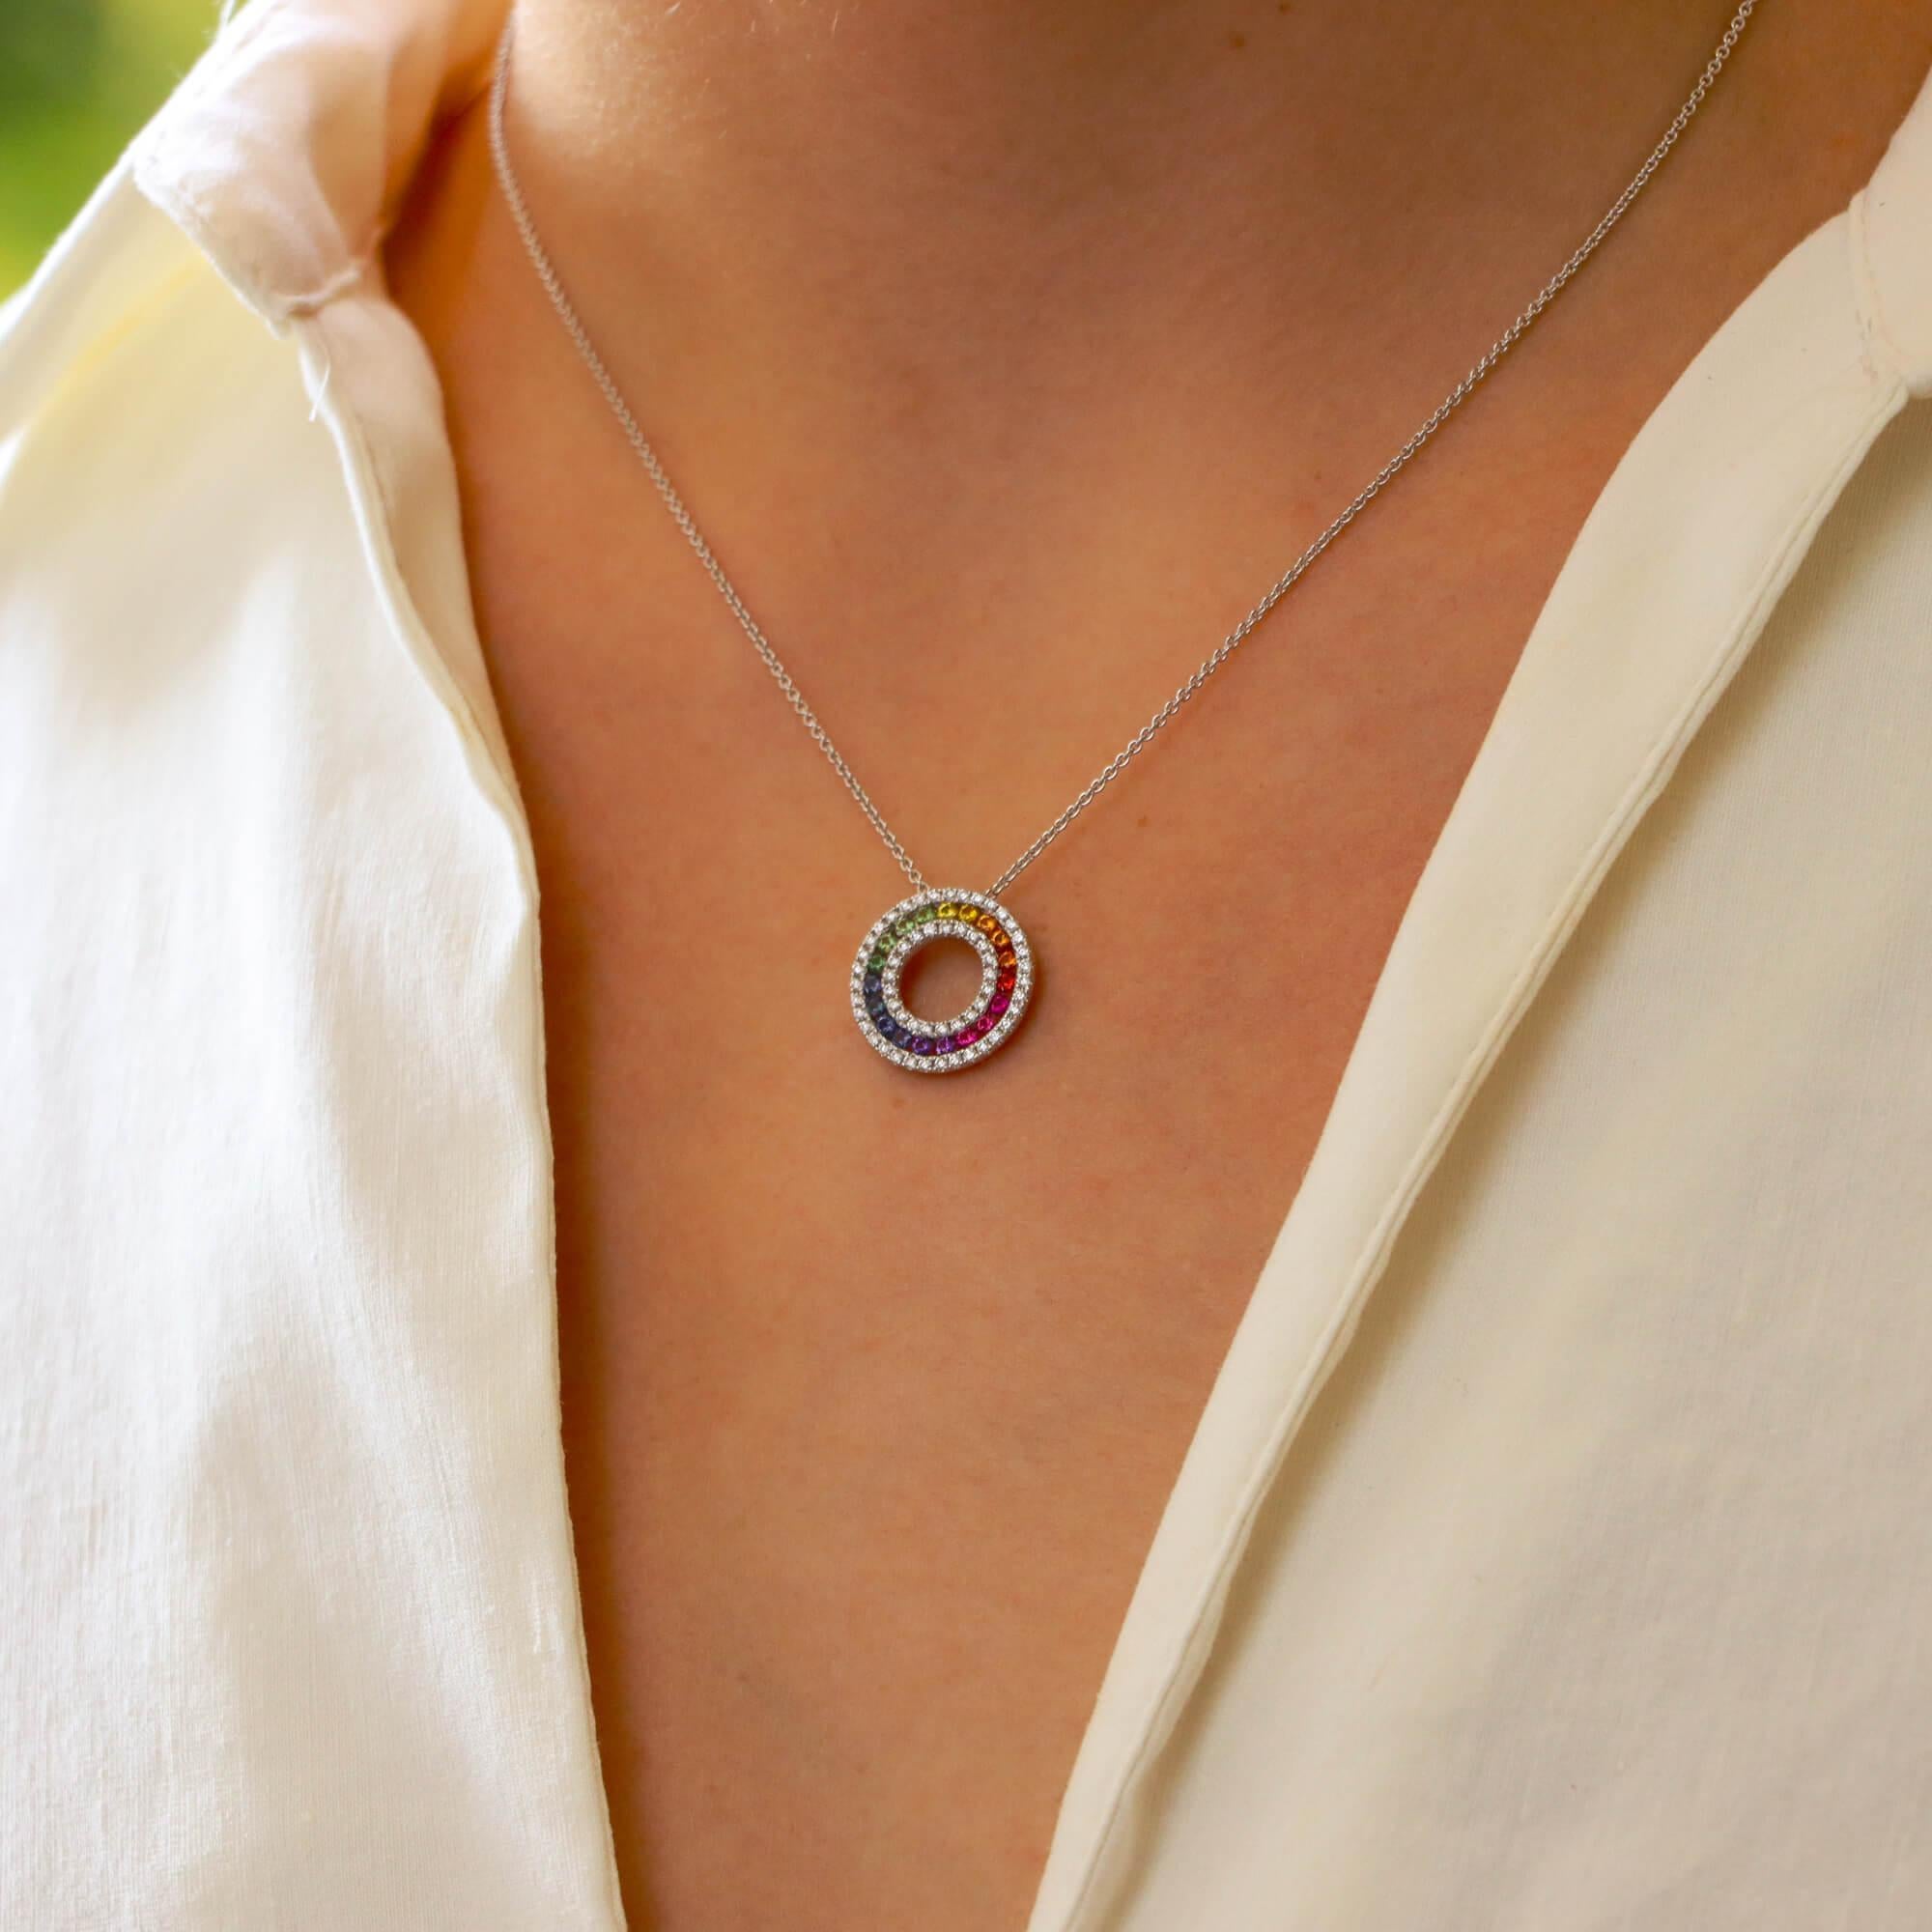 An elegant rainbow sapphire and diamond circle pendant set in 18k white gold.

The pendant depicts a circle motif, centrally set with a ring of round cut rainbow sapphires. These sapphires are bordered by round brilliant cut diamonds which enhance